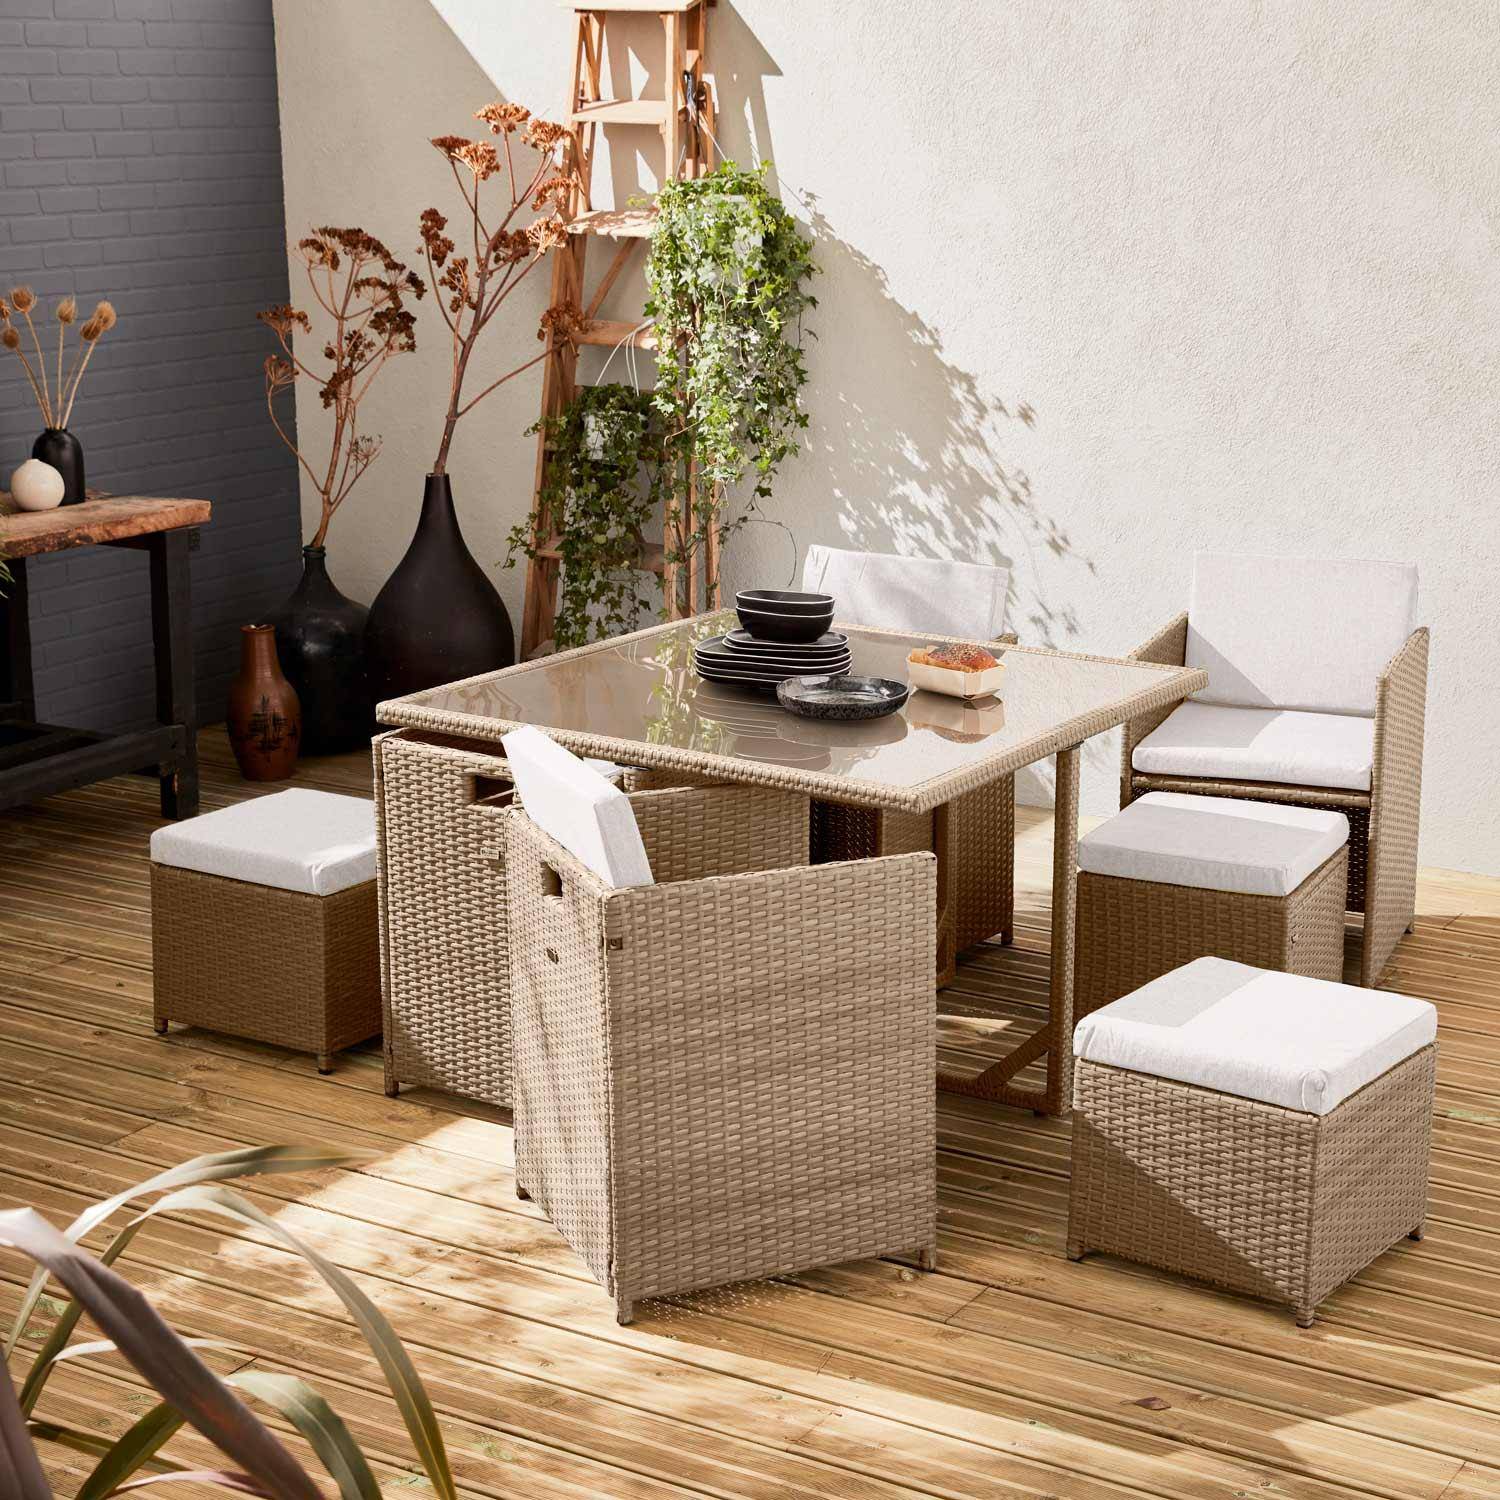 4 to 8-seater rattan cube table set - table, 4 armchairs, 4 footstools - Vabo 8 - Natural rattan, Beige cushions Photo1